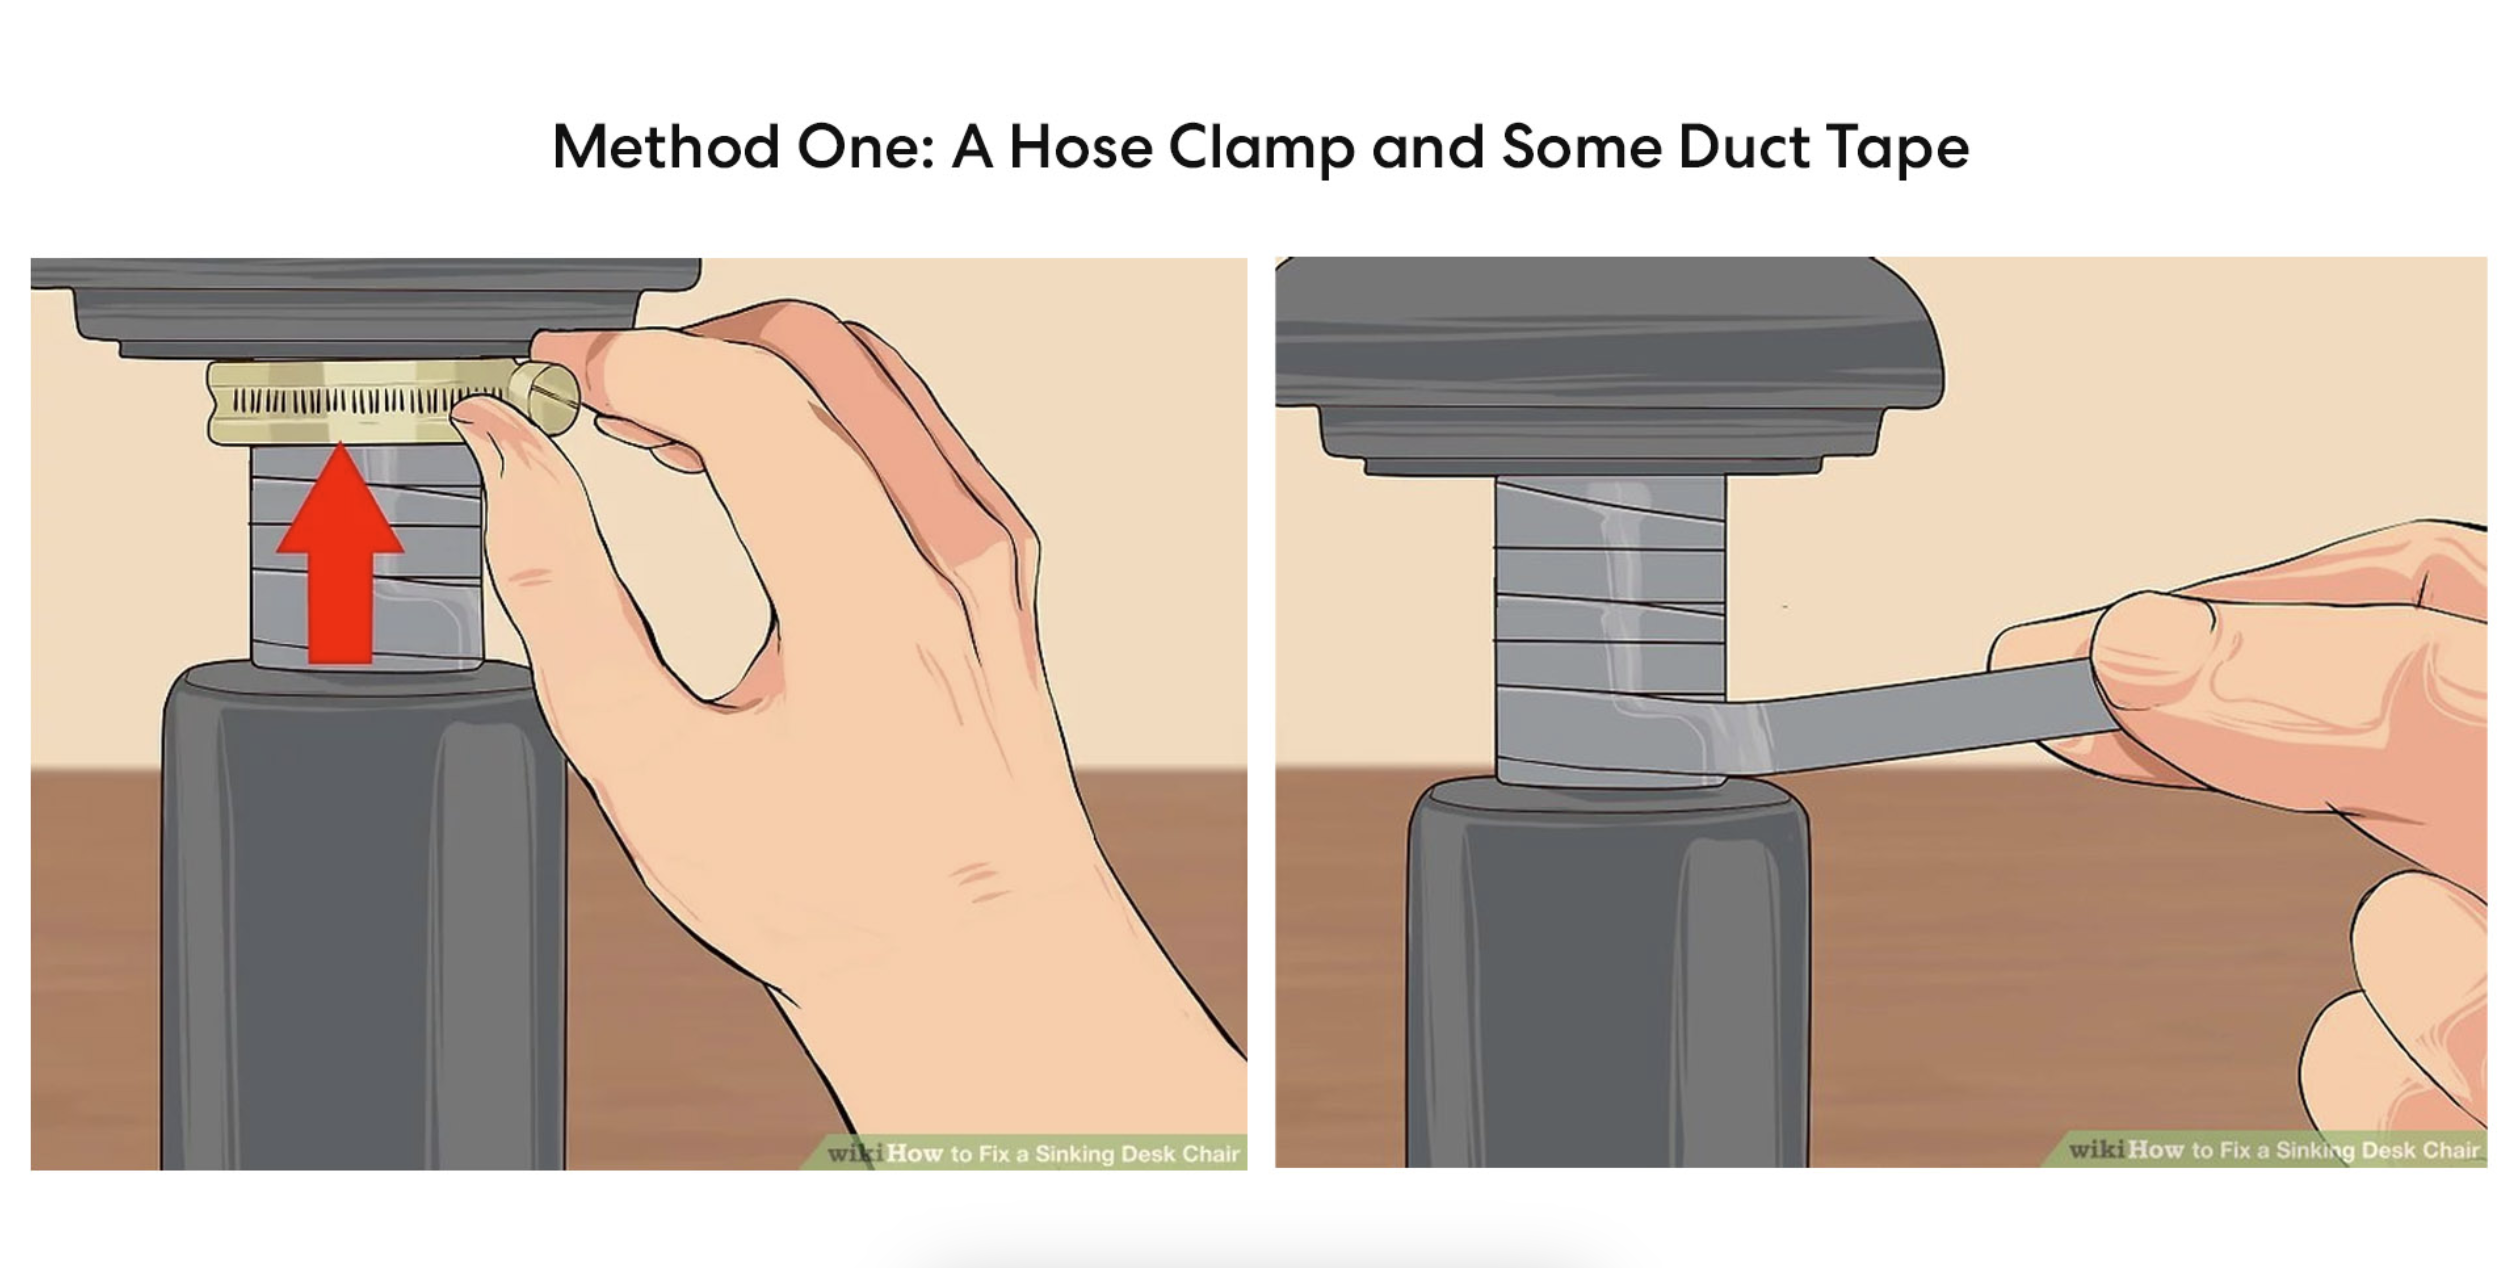 Using a Hose Clamp or Duct Tape